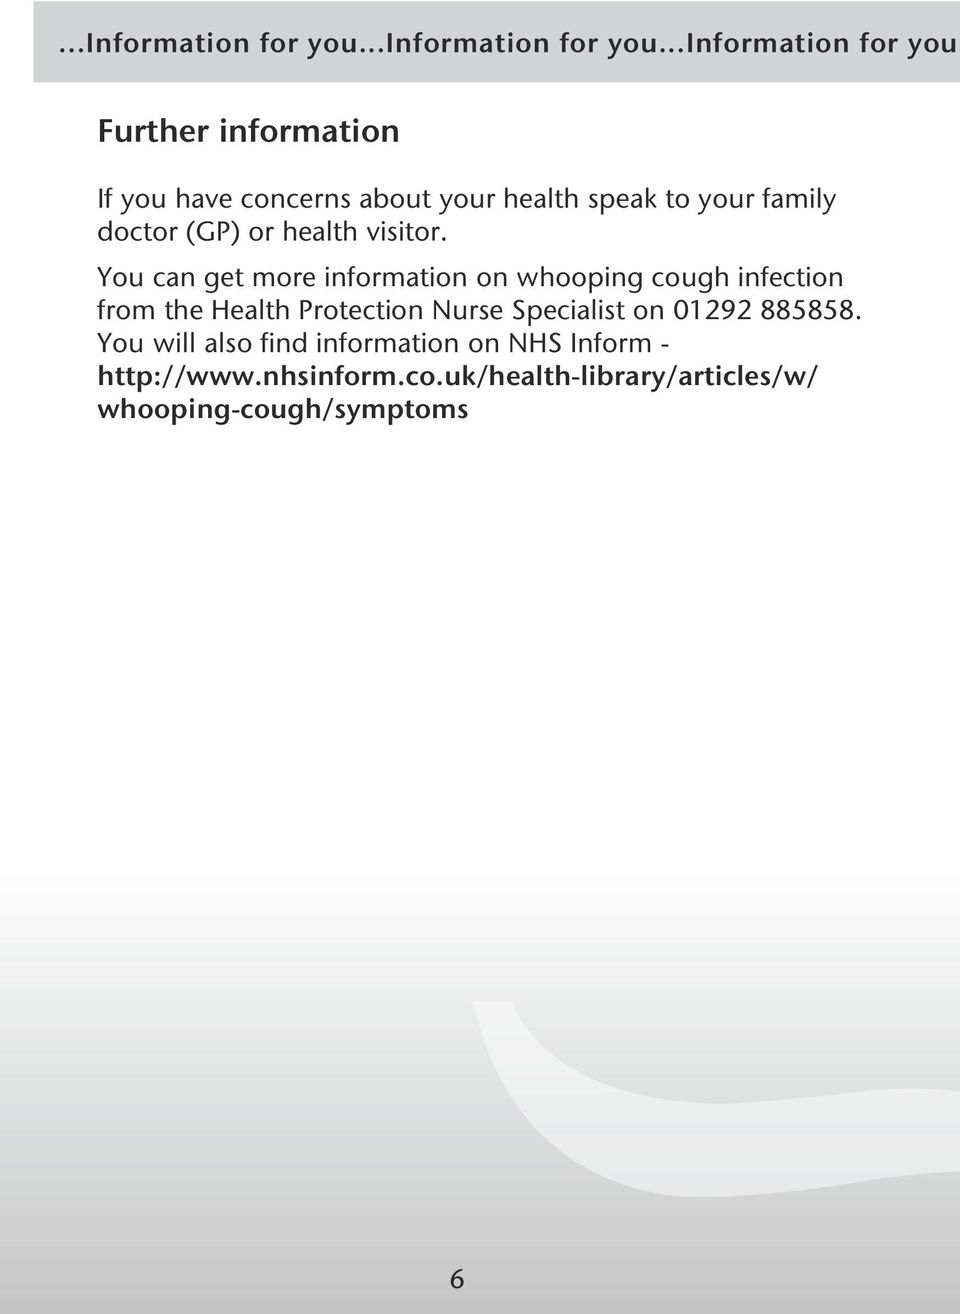 Further information If you have concerns about your health speak to your family doctor (GP) or health